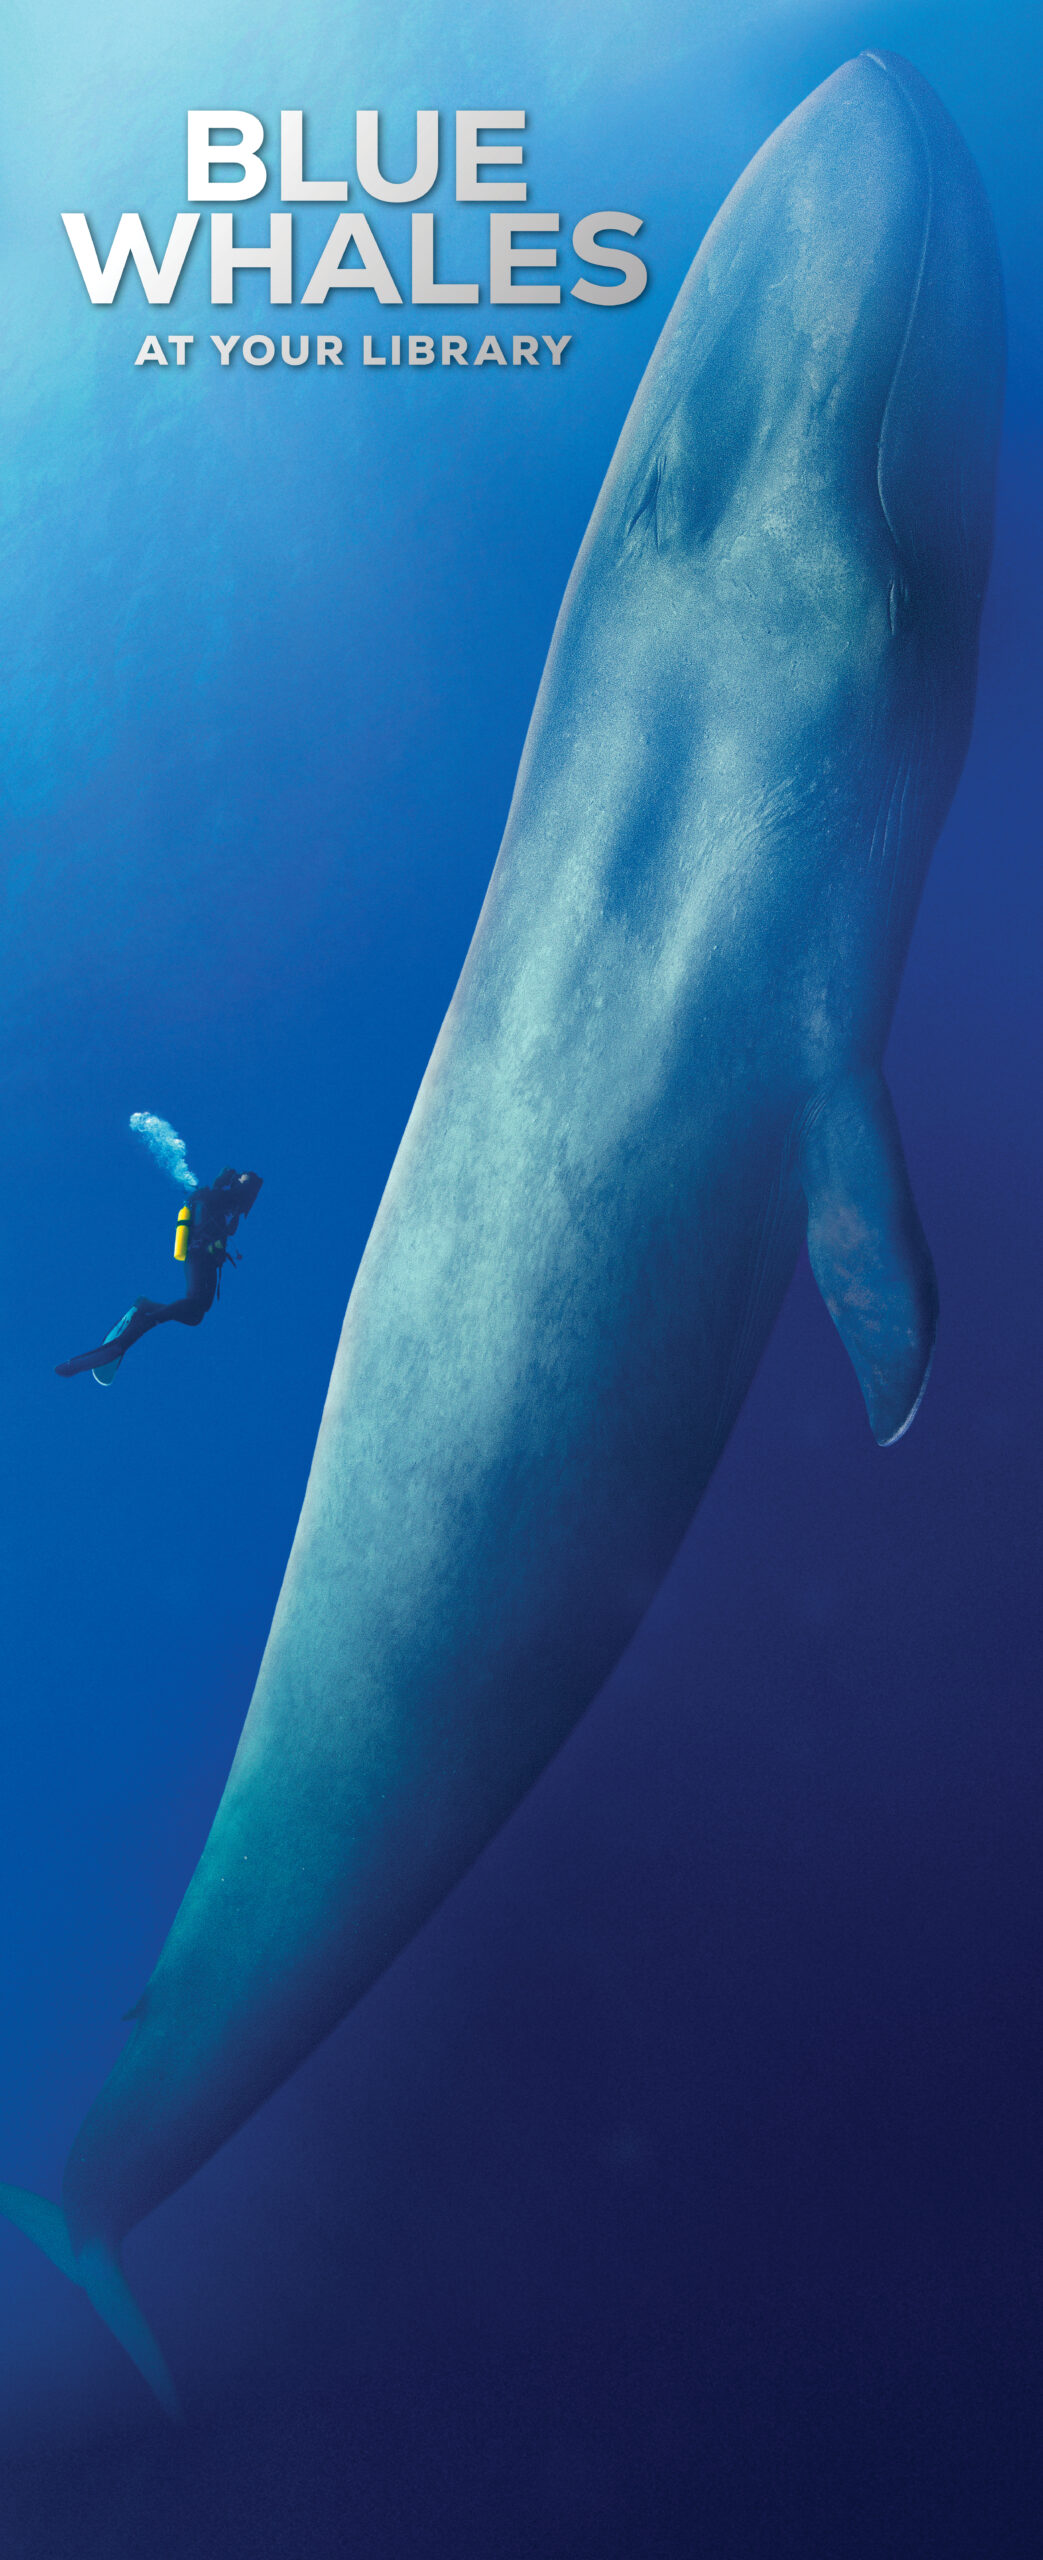 Blue whale swimming by with a scuba diver next to it.